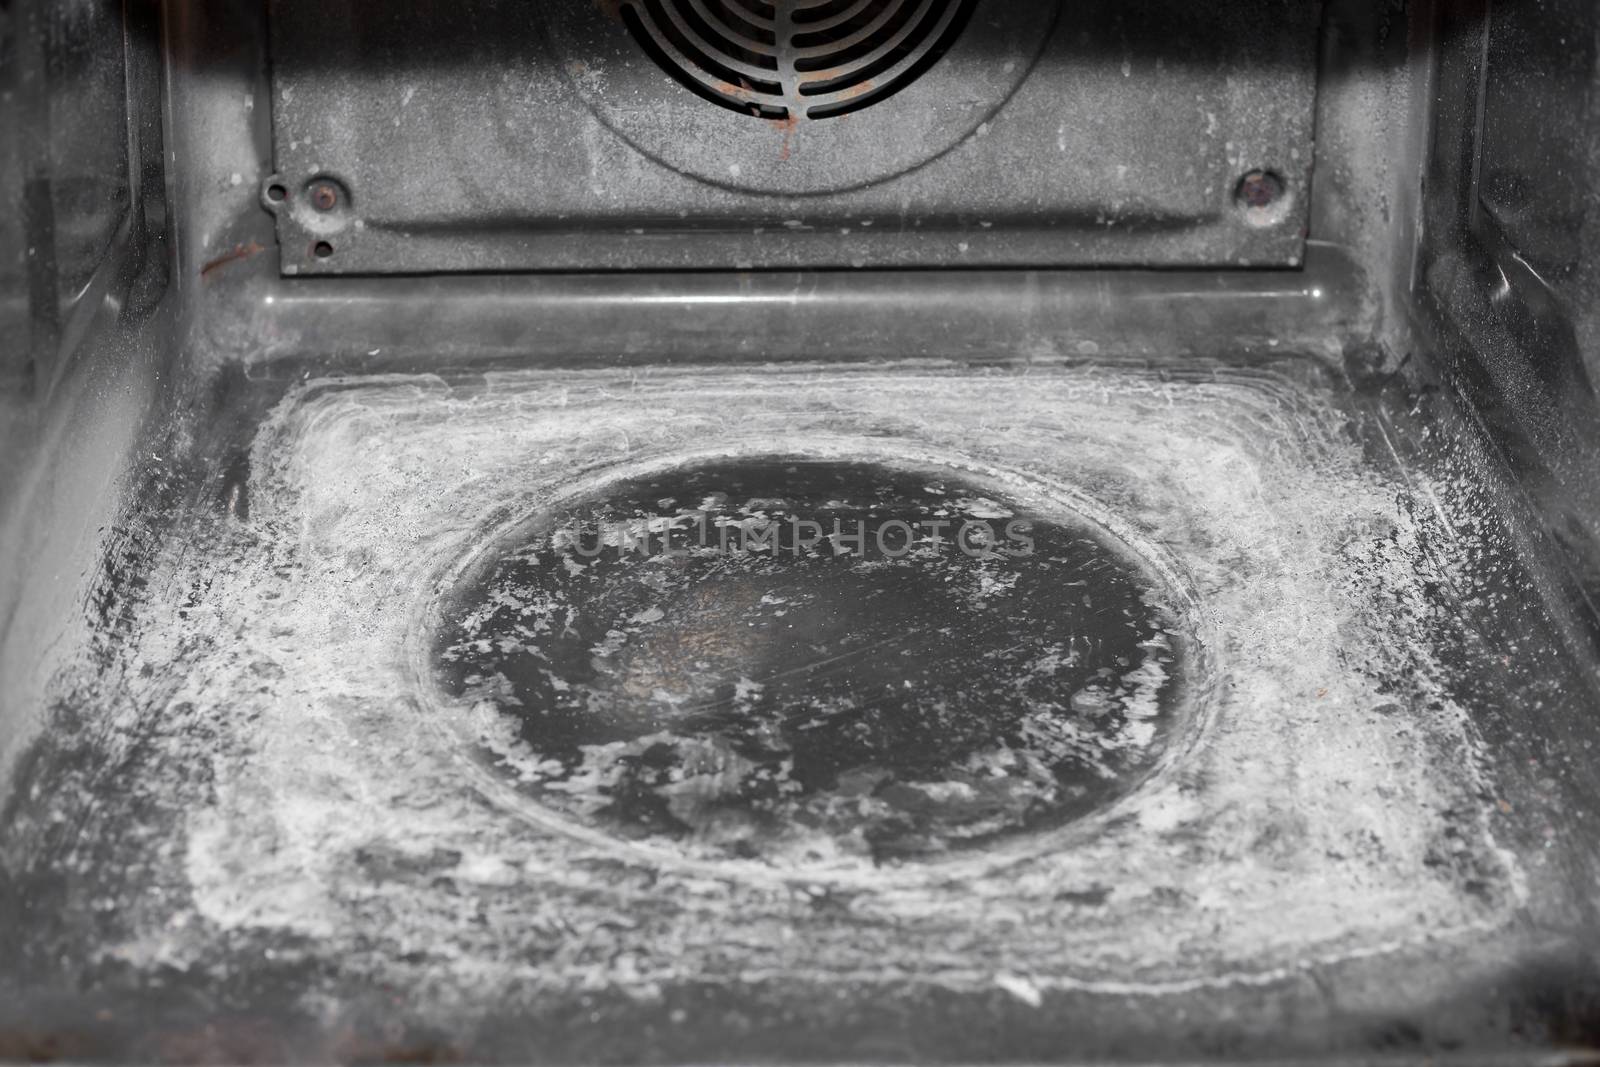 Oven after a self-cleaning, just wipe off